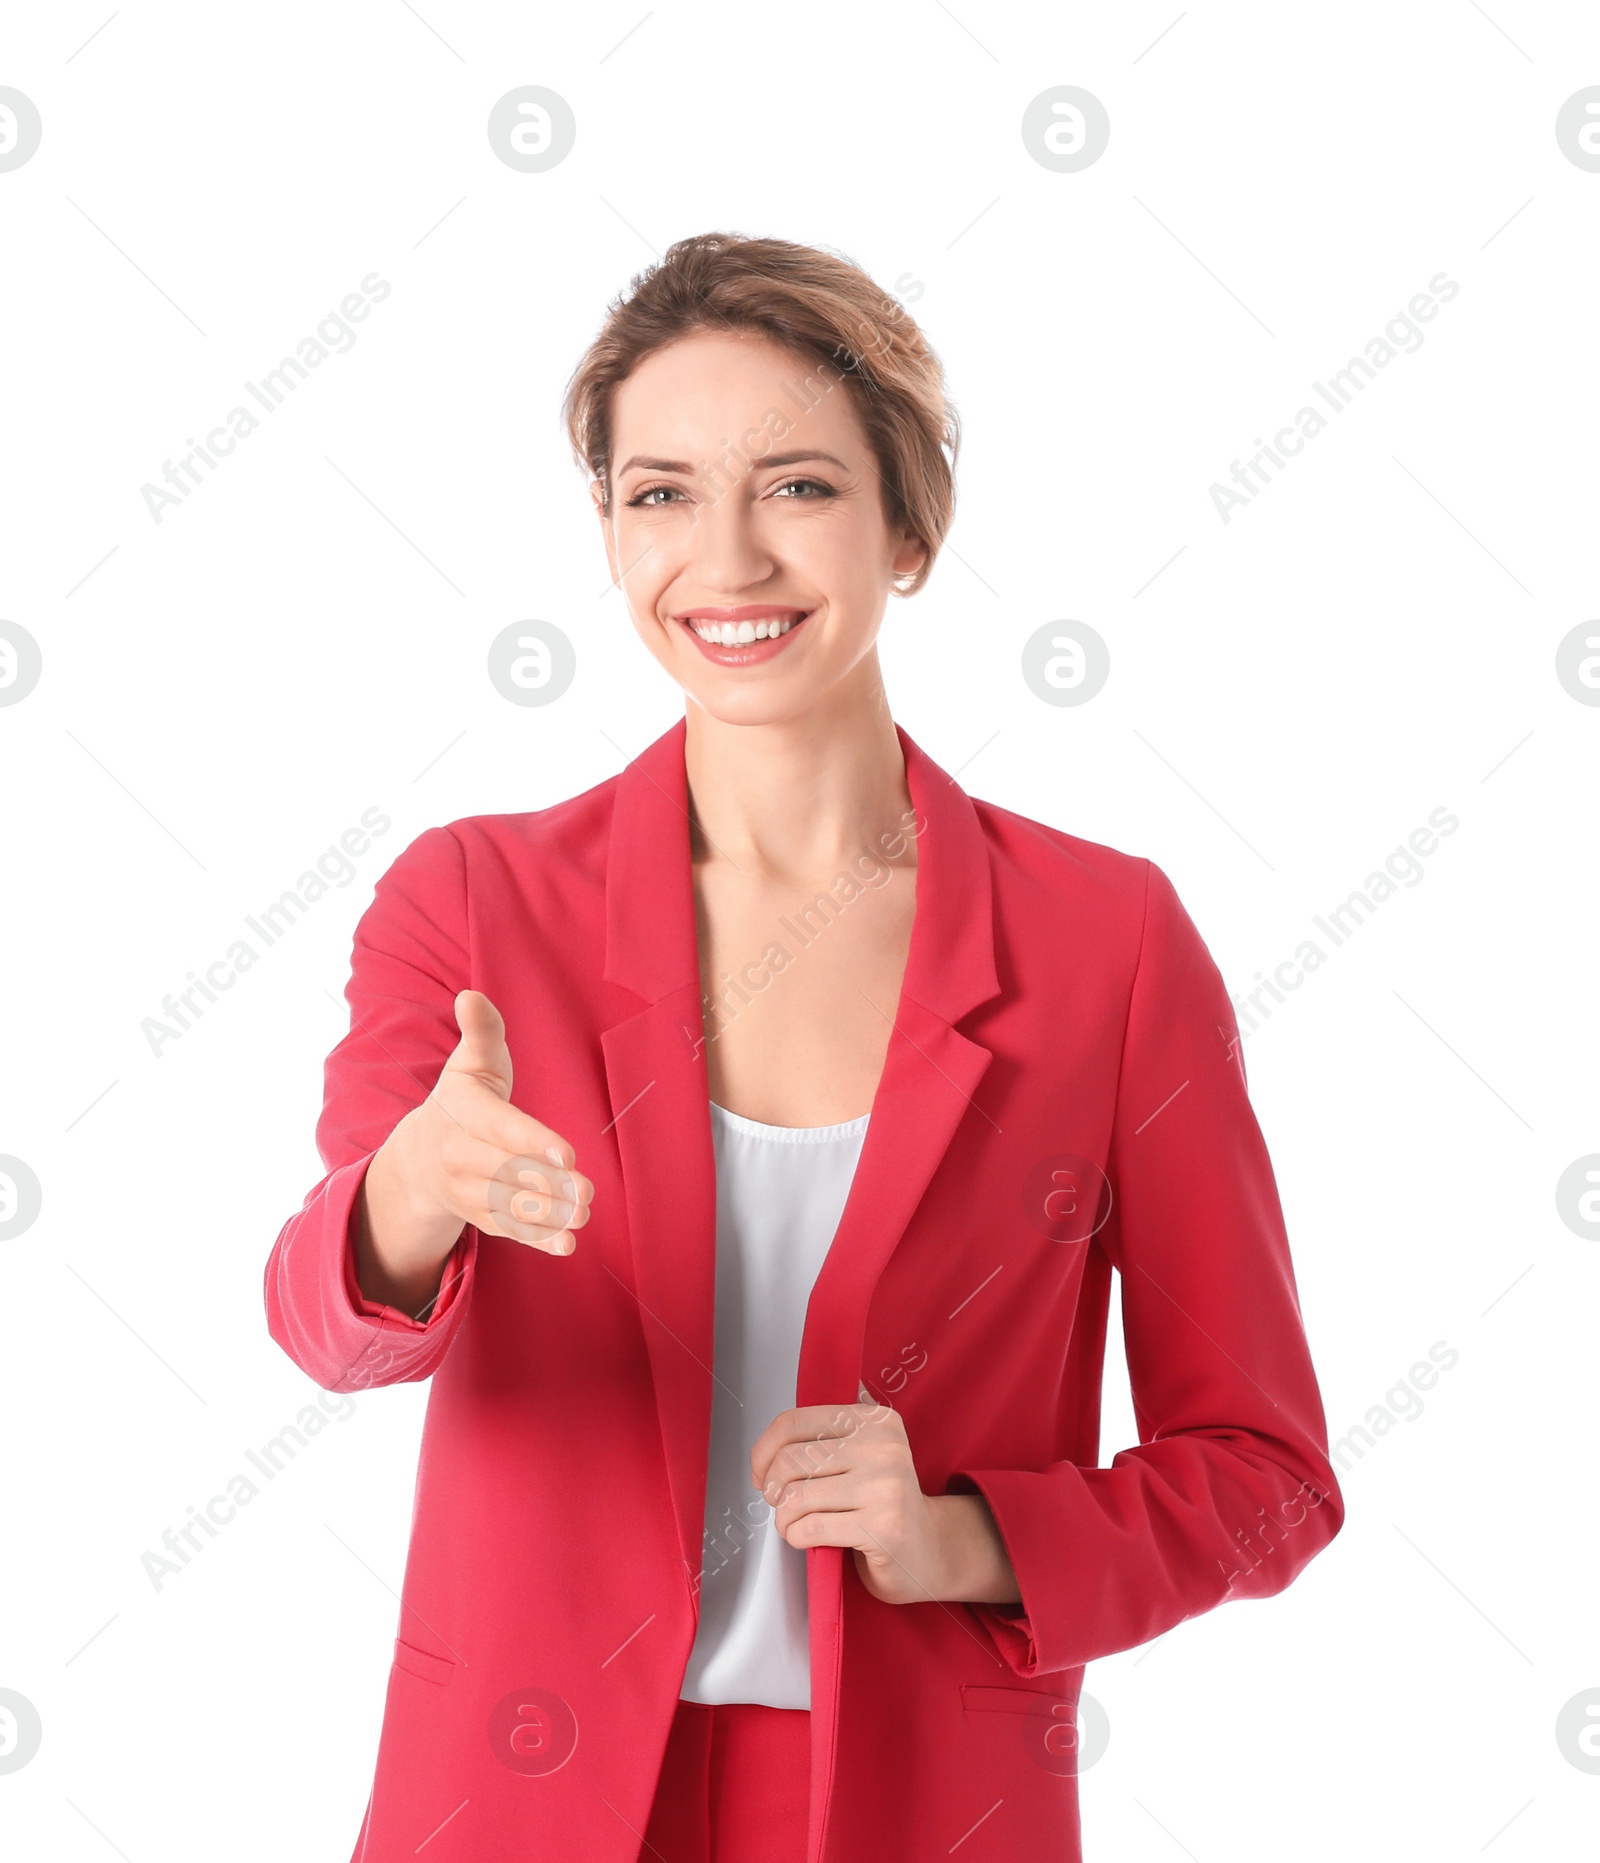 Photo of Businesswoman in elegant suit on white background